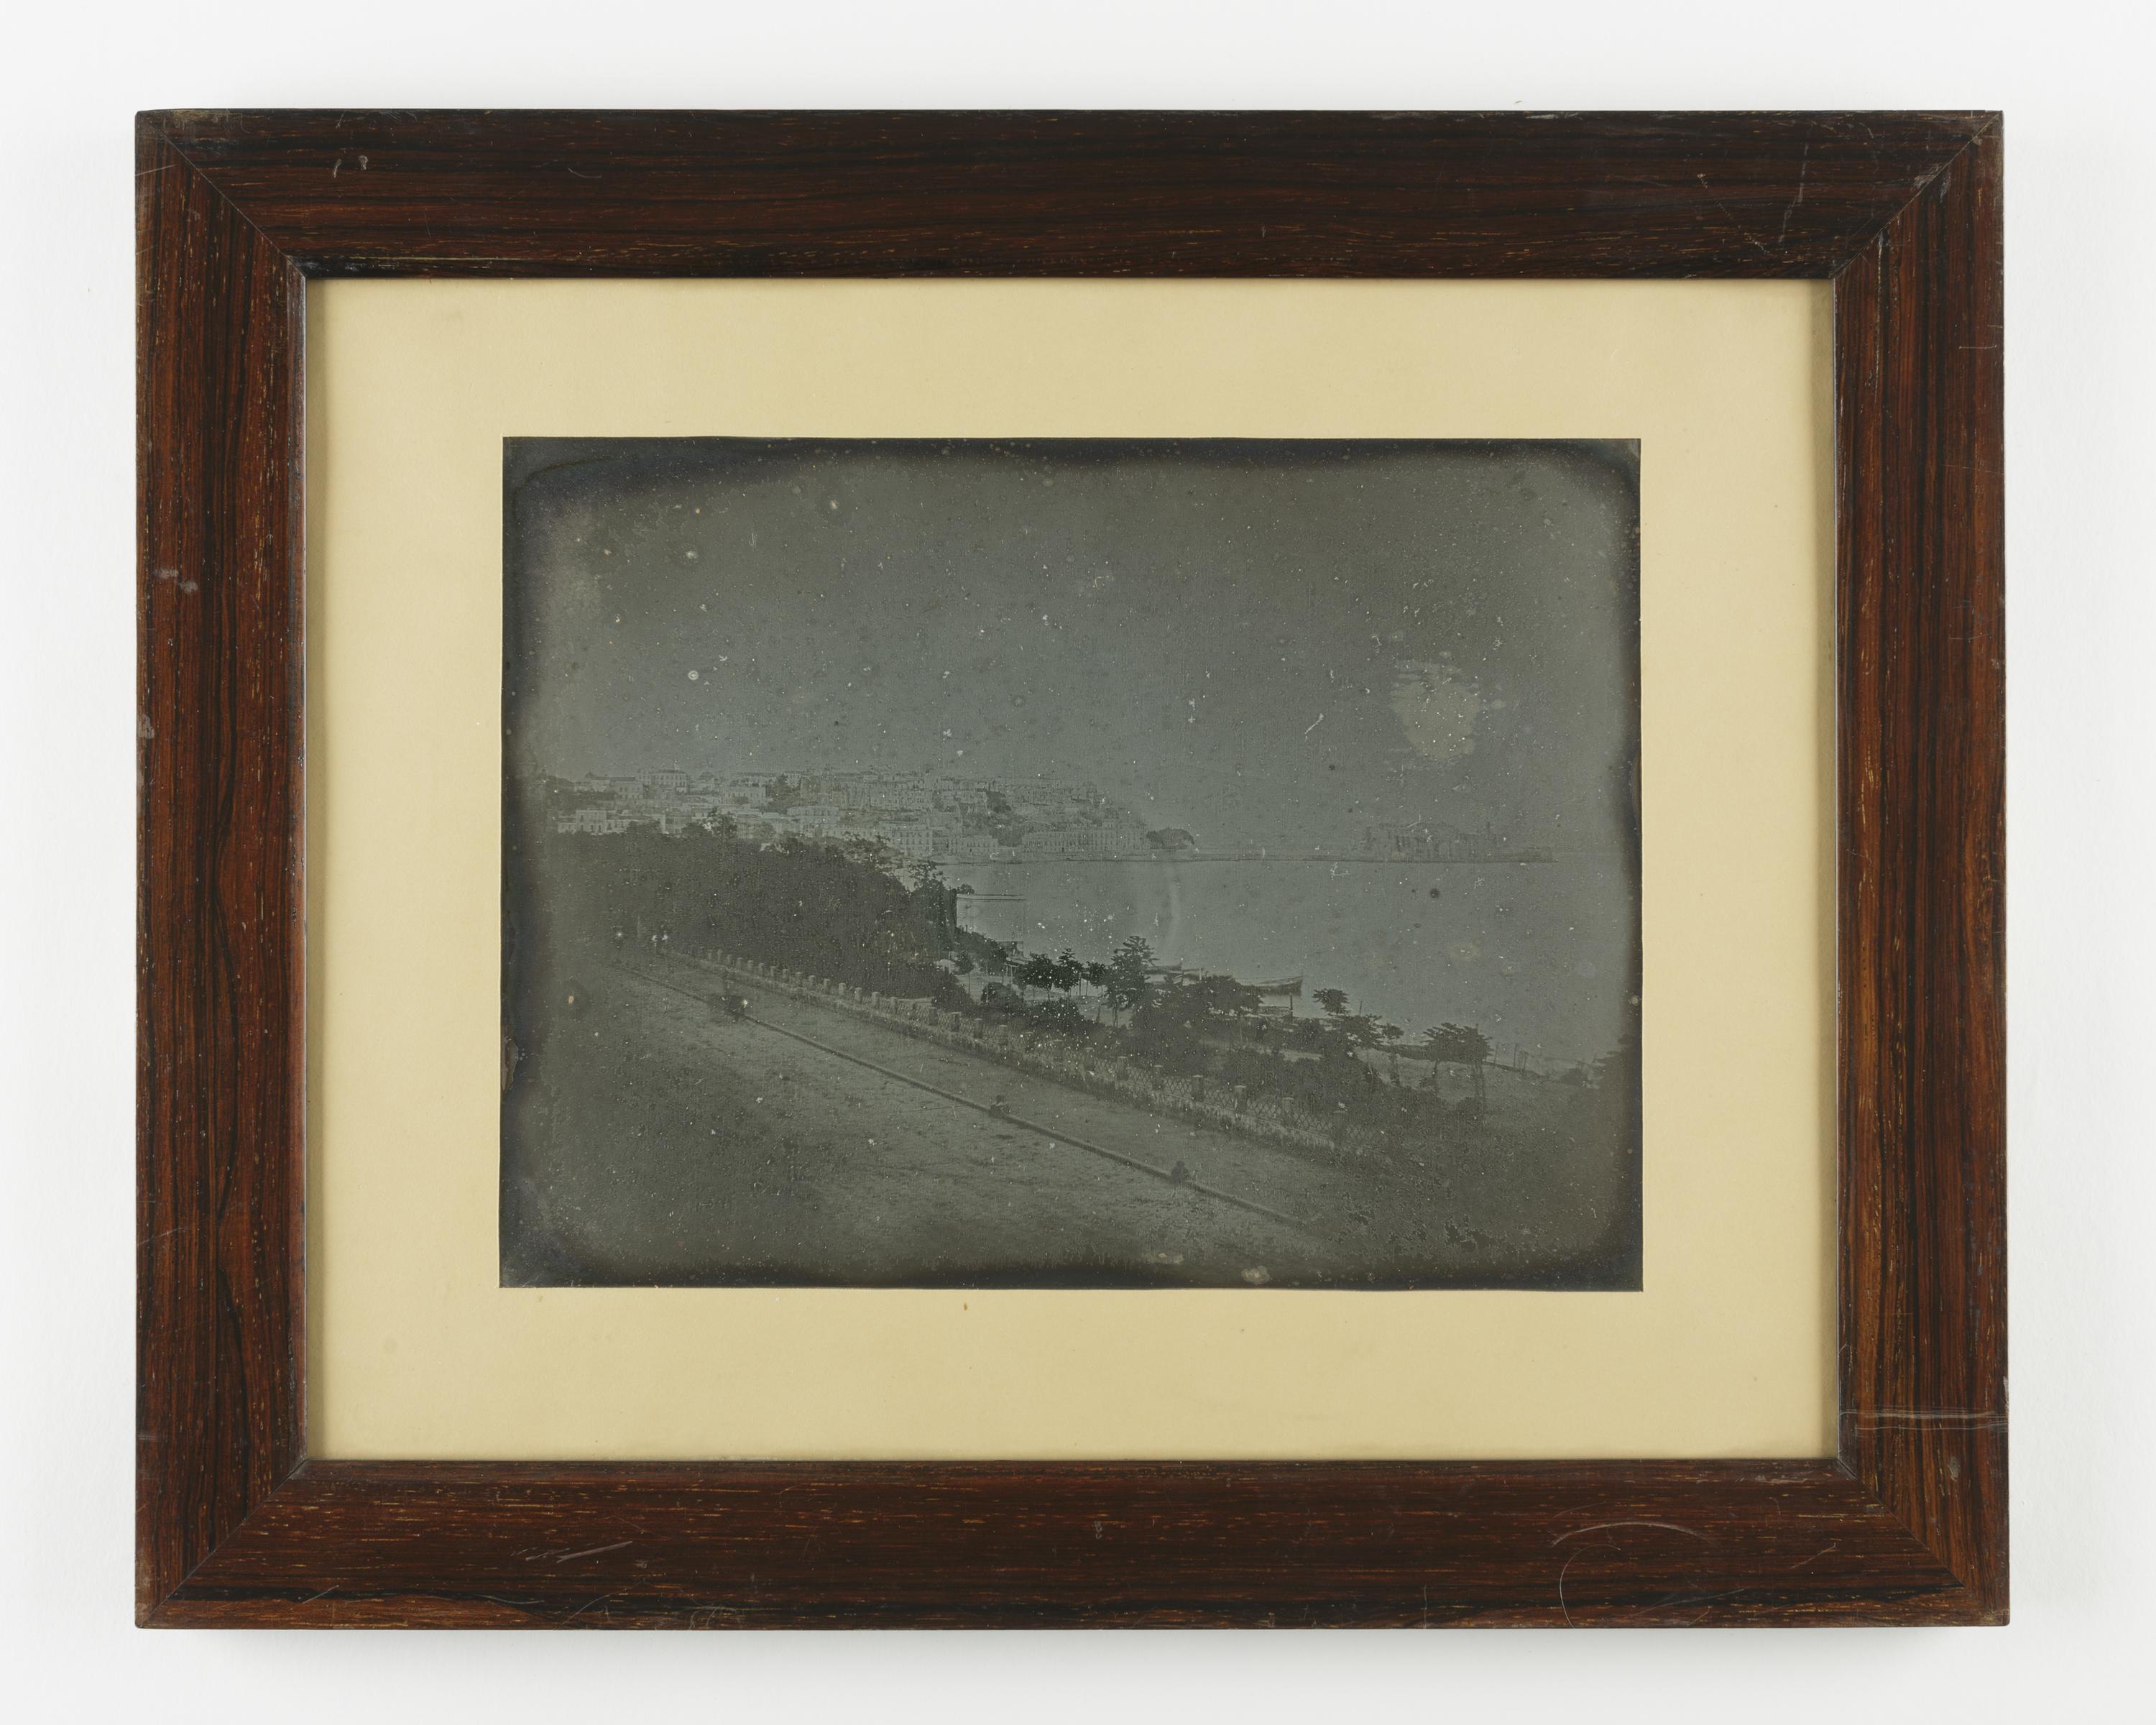 Daguerreptype, entitled "Naples, View from the second floor, South Window of Riveria di Chiaja No 57, looking East", taken by Alexander John Ellis on 25th May 1841